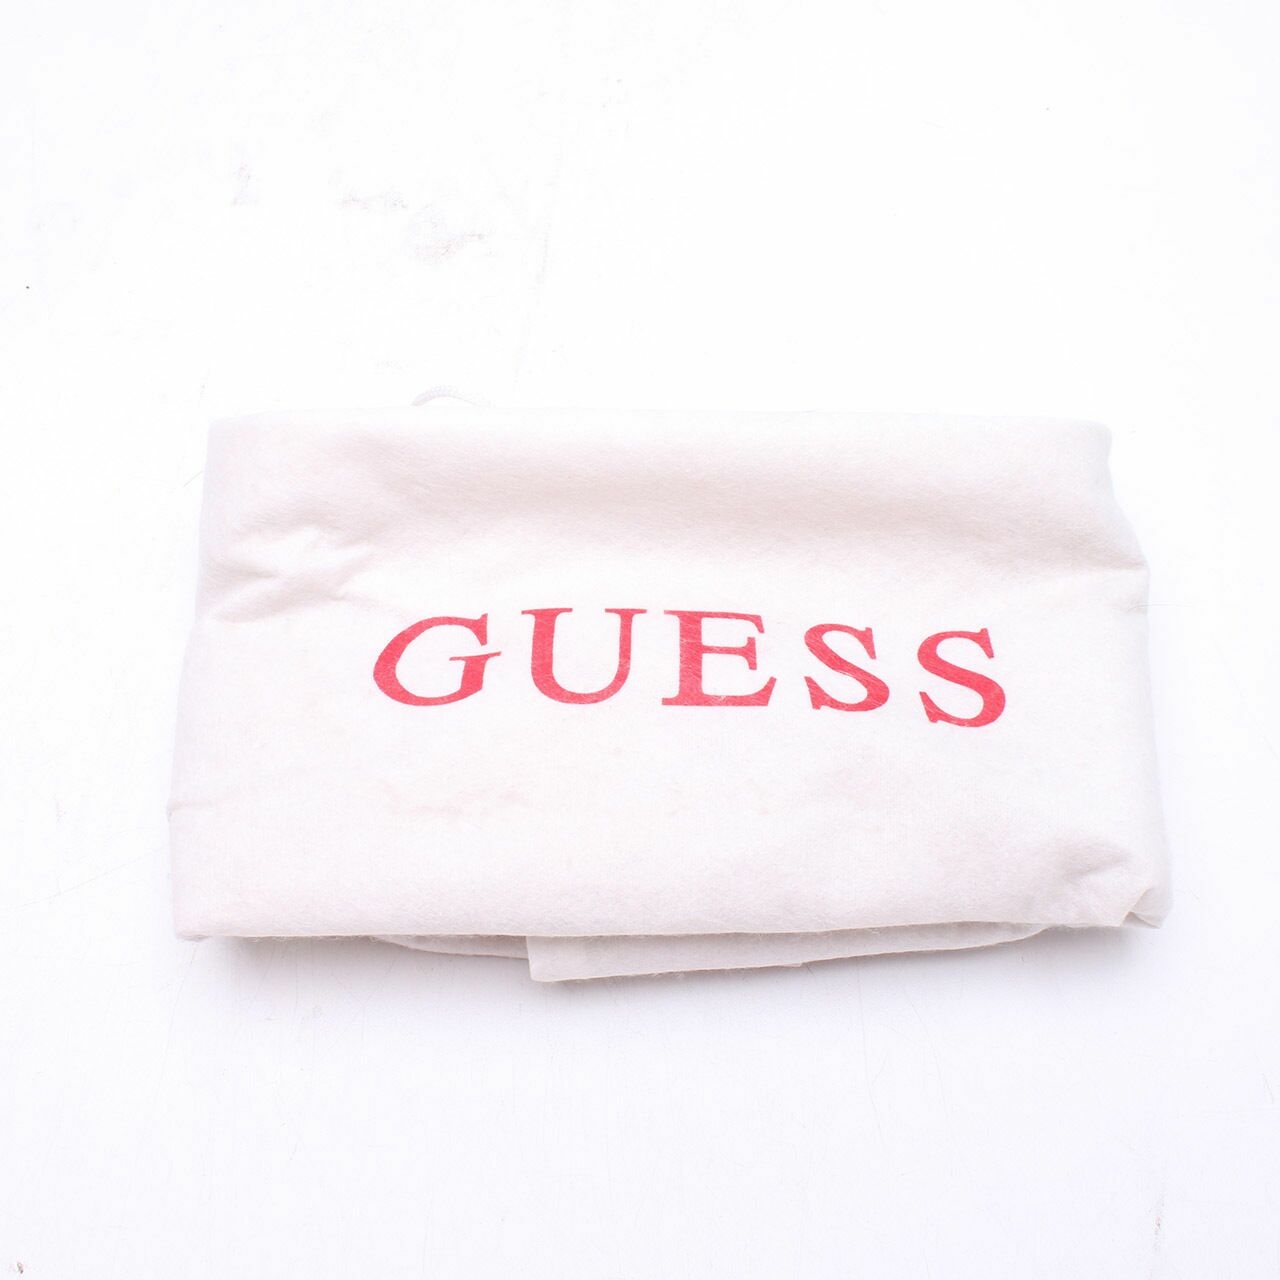 Guess White Floral Tote Bag